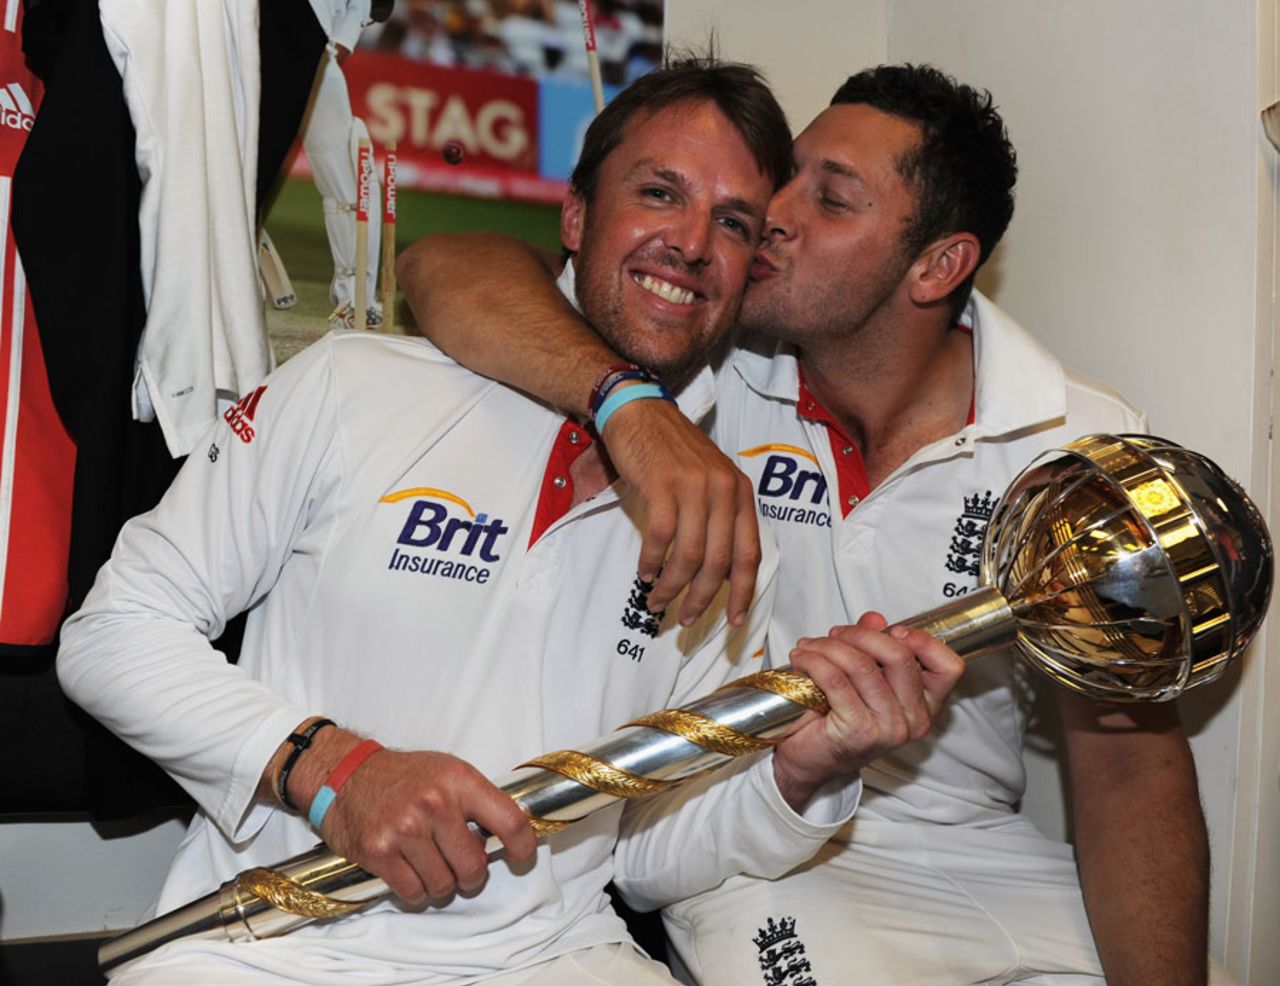 Graeme Swann and Tim Bresnan underline how closely knit the English side is, England v India, 4th Test, The Oval, 5th day, August 22, 2011